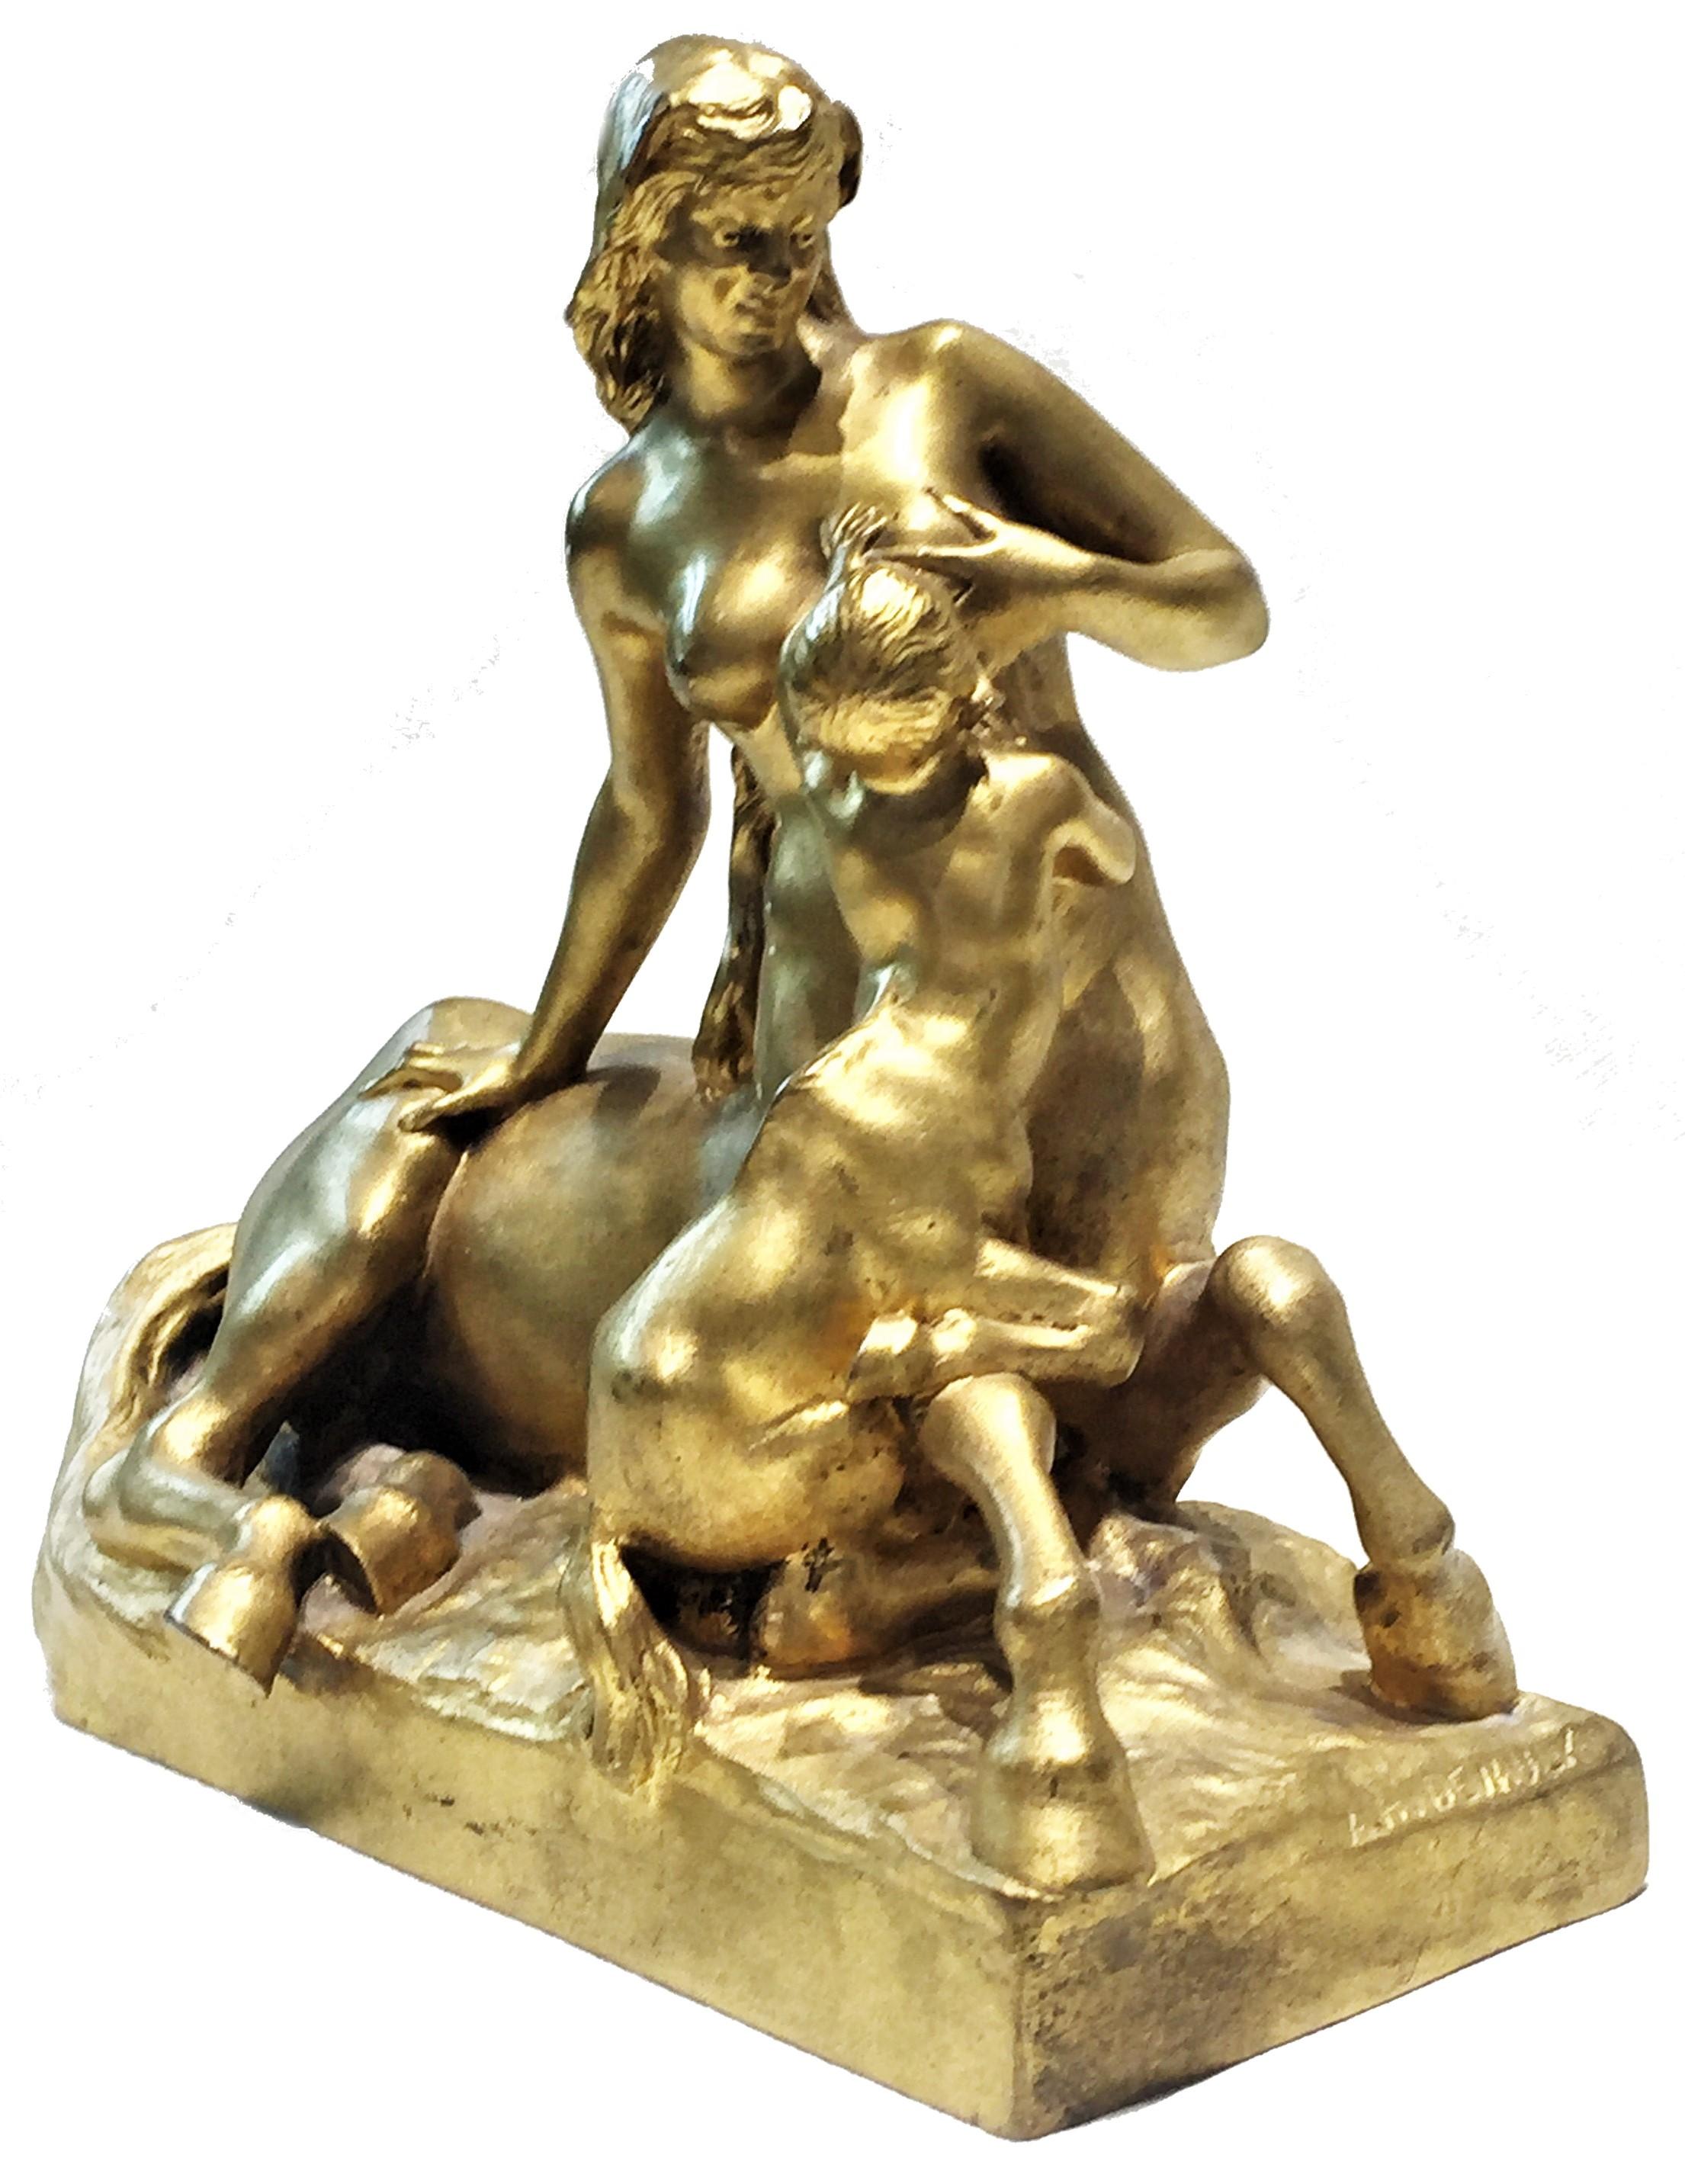 Signed “A.H. Devaulx”, and marked “Susse Fes Ed.20”
Dimensions: Height 6-7/8”, width 7-7/8”, depth 4-1/4”

This wonderfully unusual desktop sculpture of gilded bronze, depicting a beautiful female-centaur breastfeeding her cub is made in a classic